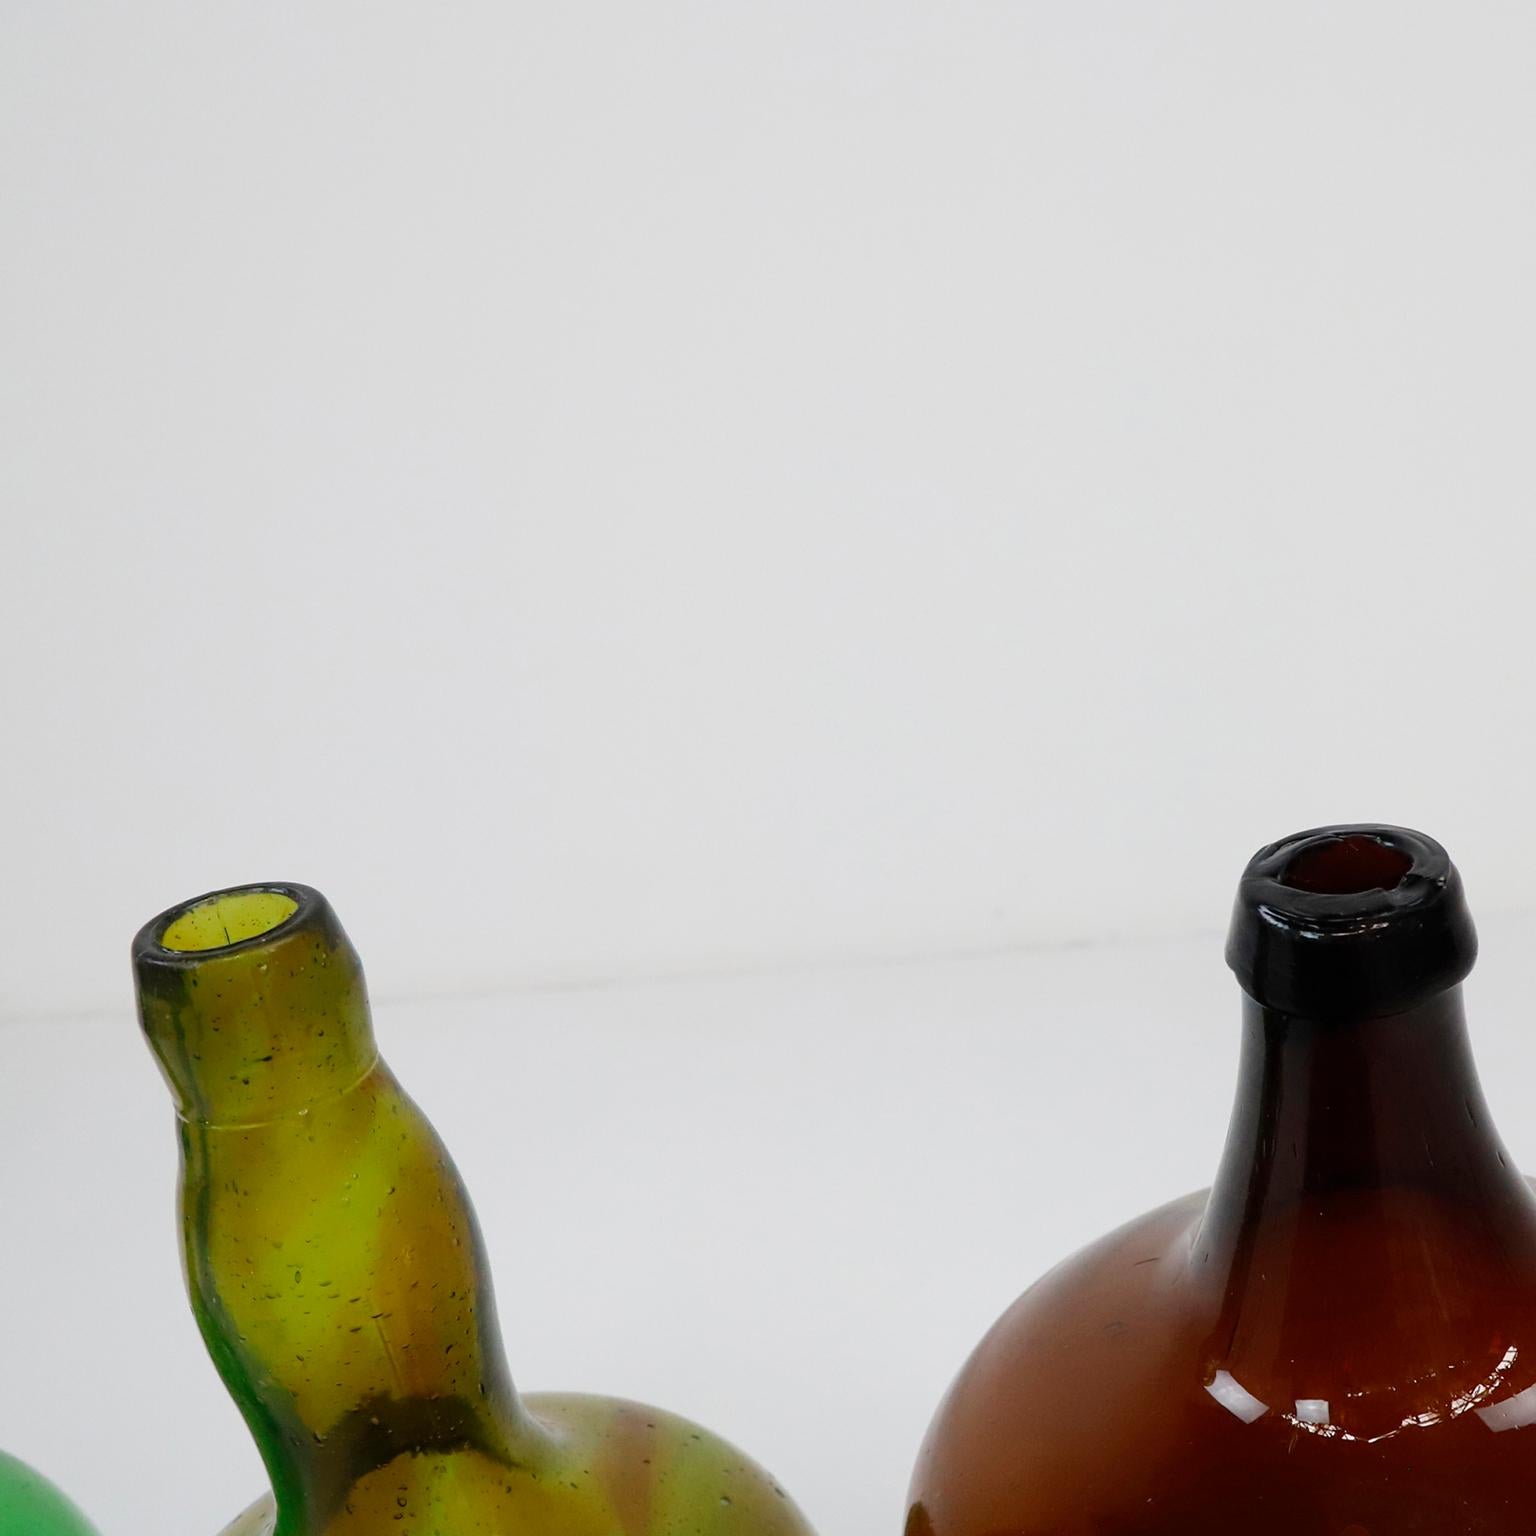 Circa 1940, we offer this set of antique handmade bottles. The amber bottle has a scratch, but it is not broken. *see pic 3.